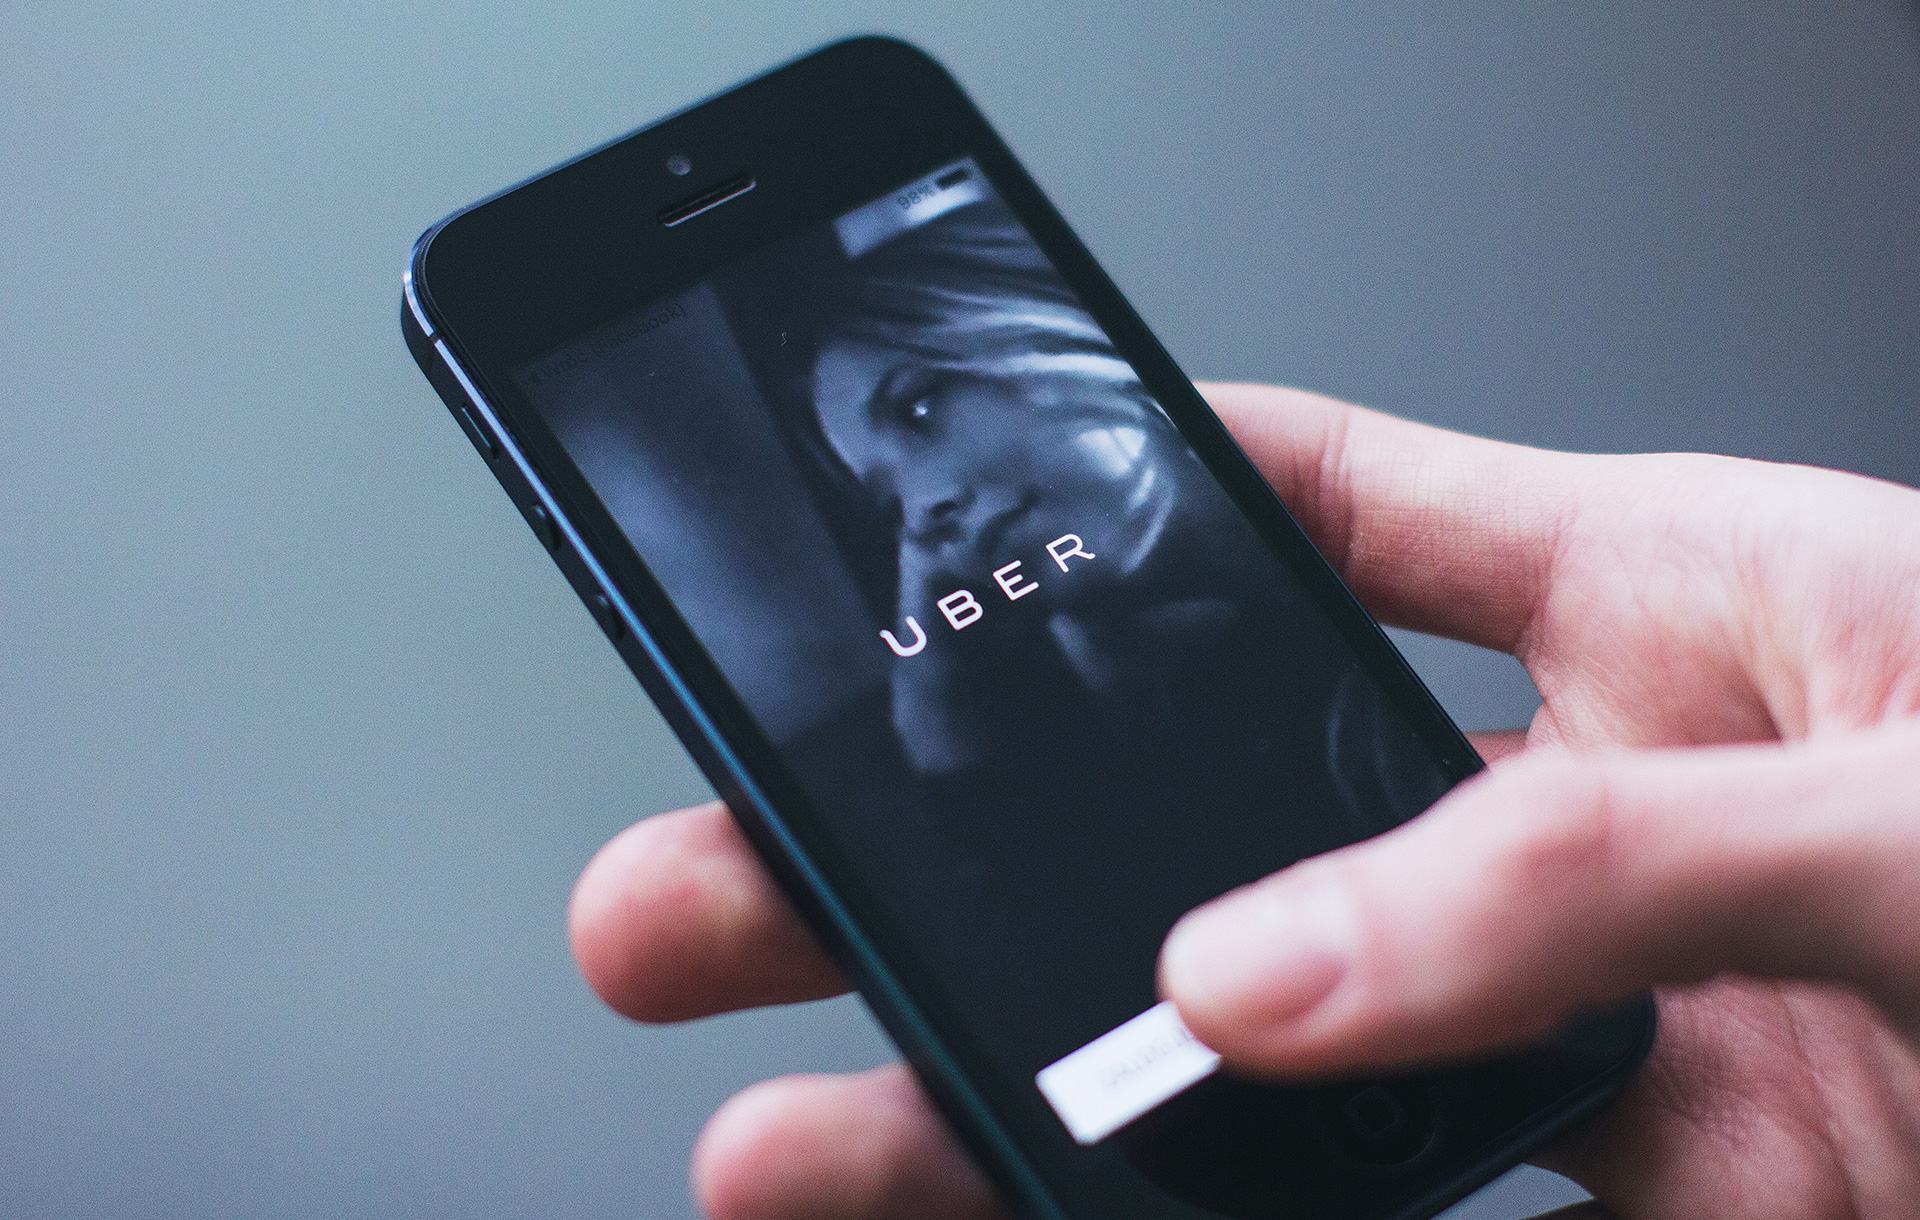 Will we see more apps like Uber 3 trends that will define the future of sharing apps